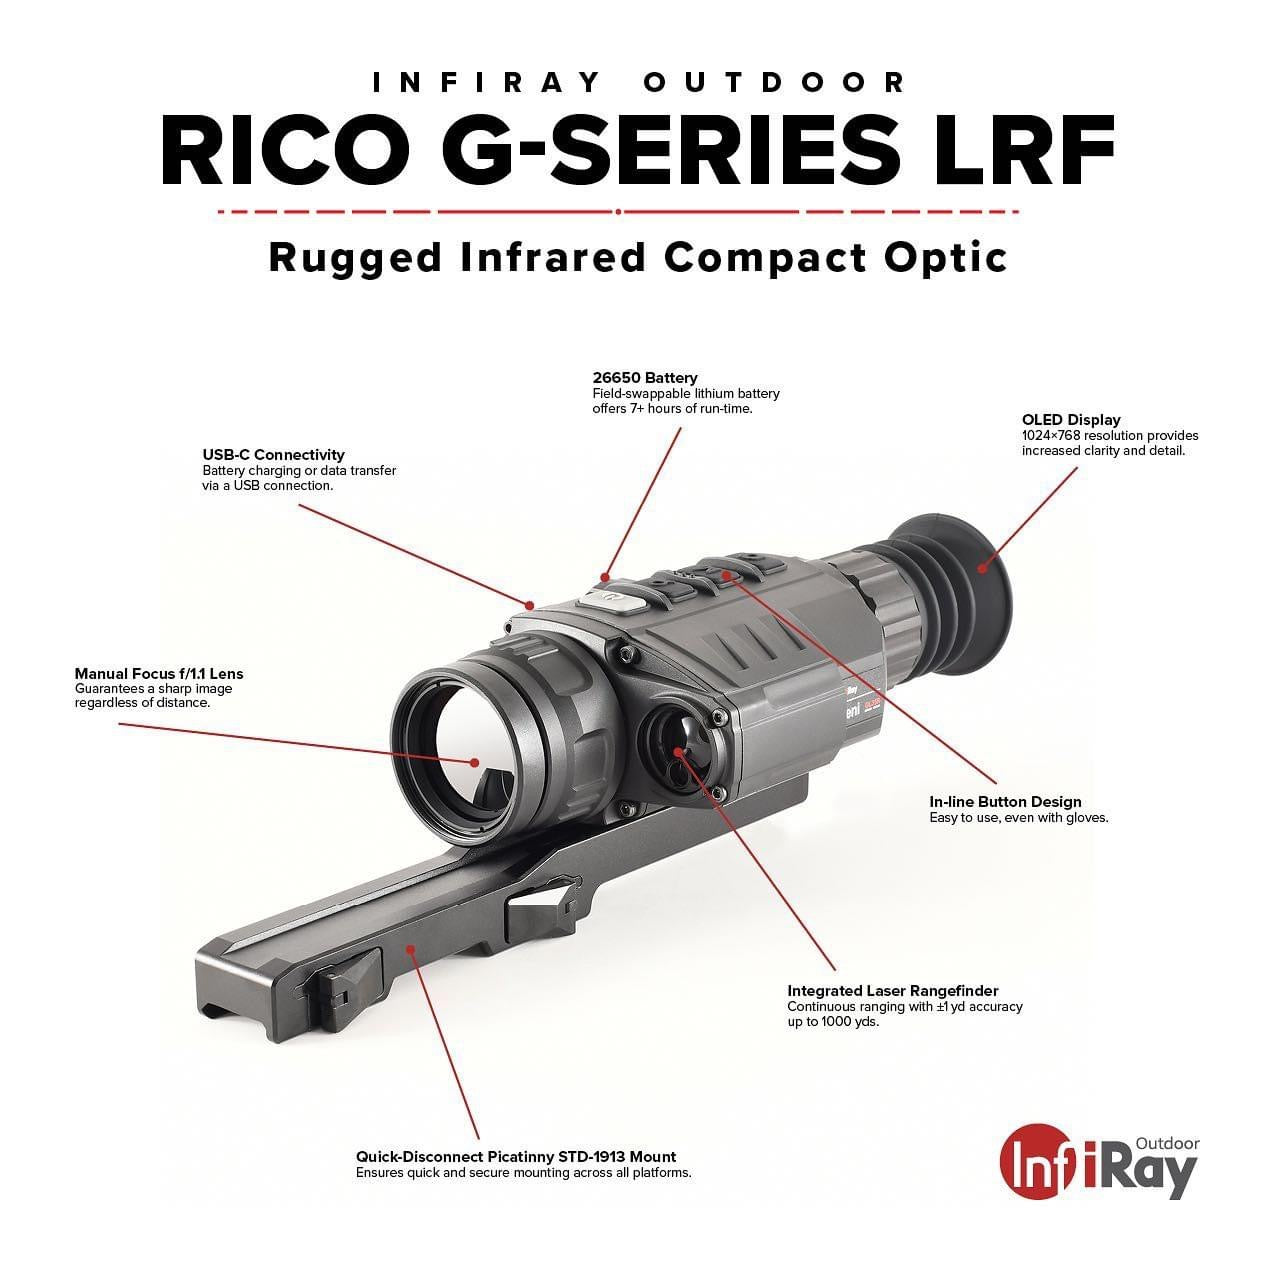 InfiRay Outdoor RICO GL35R 384 3x 35mm Thermal Scope (LRF)